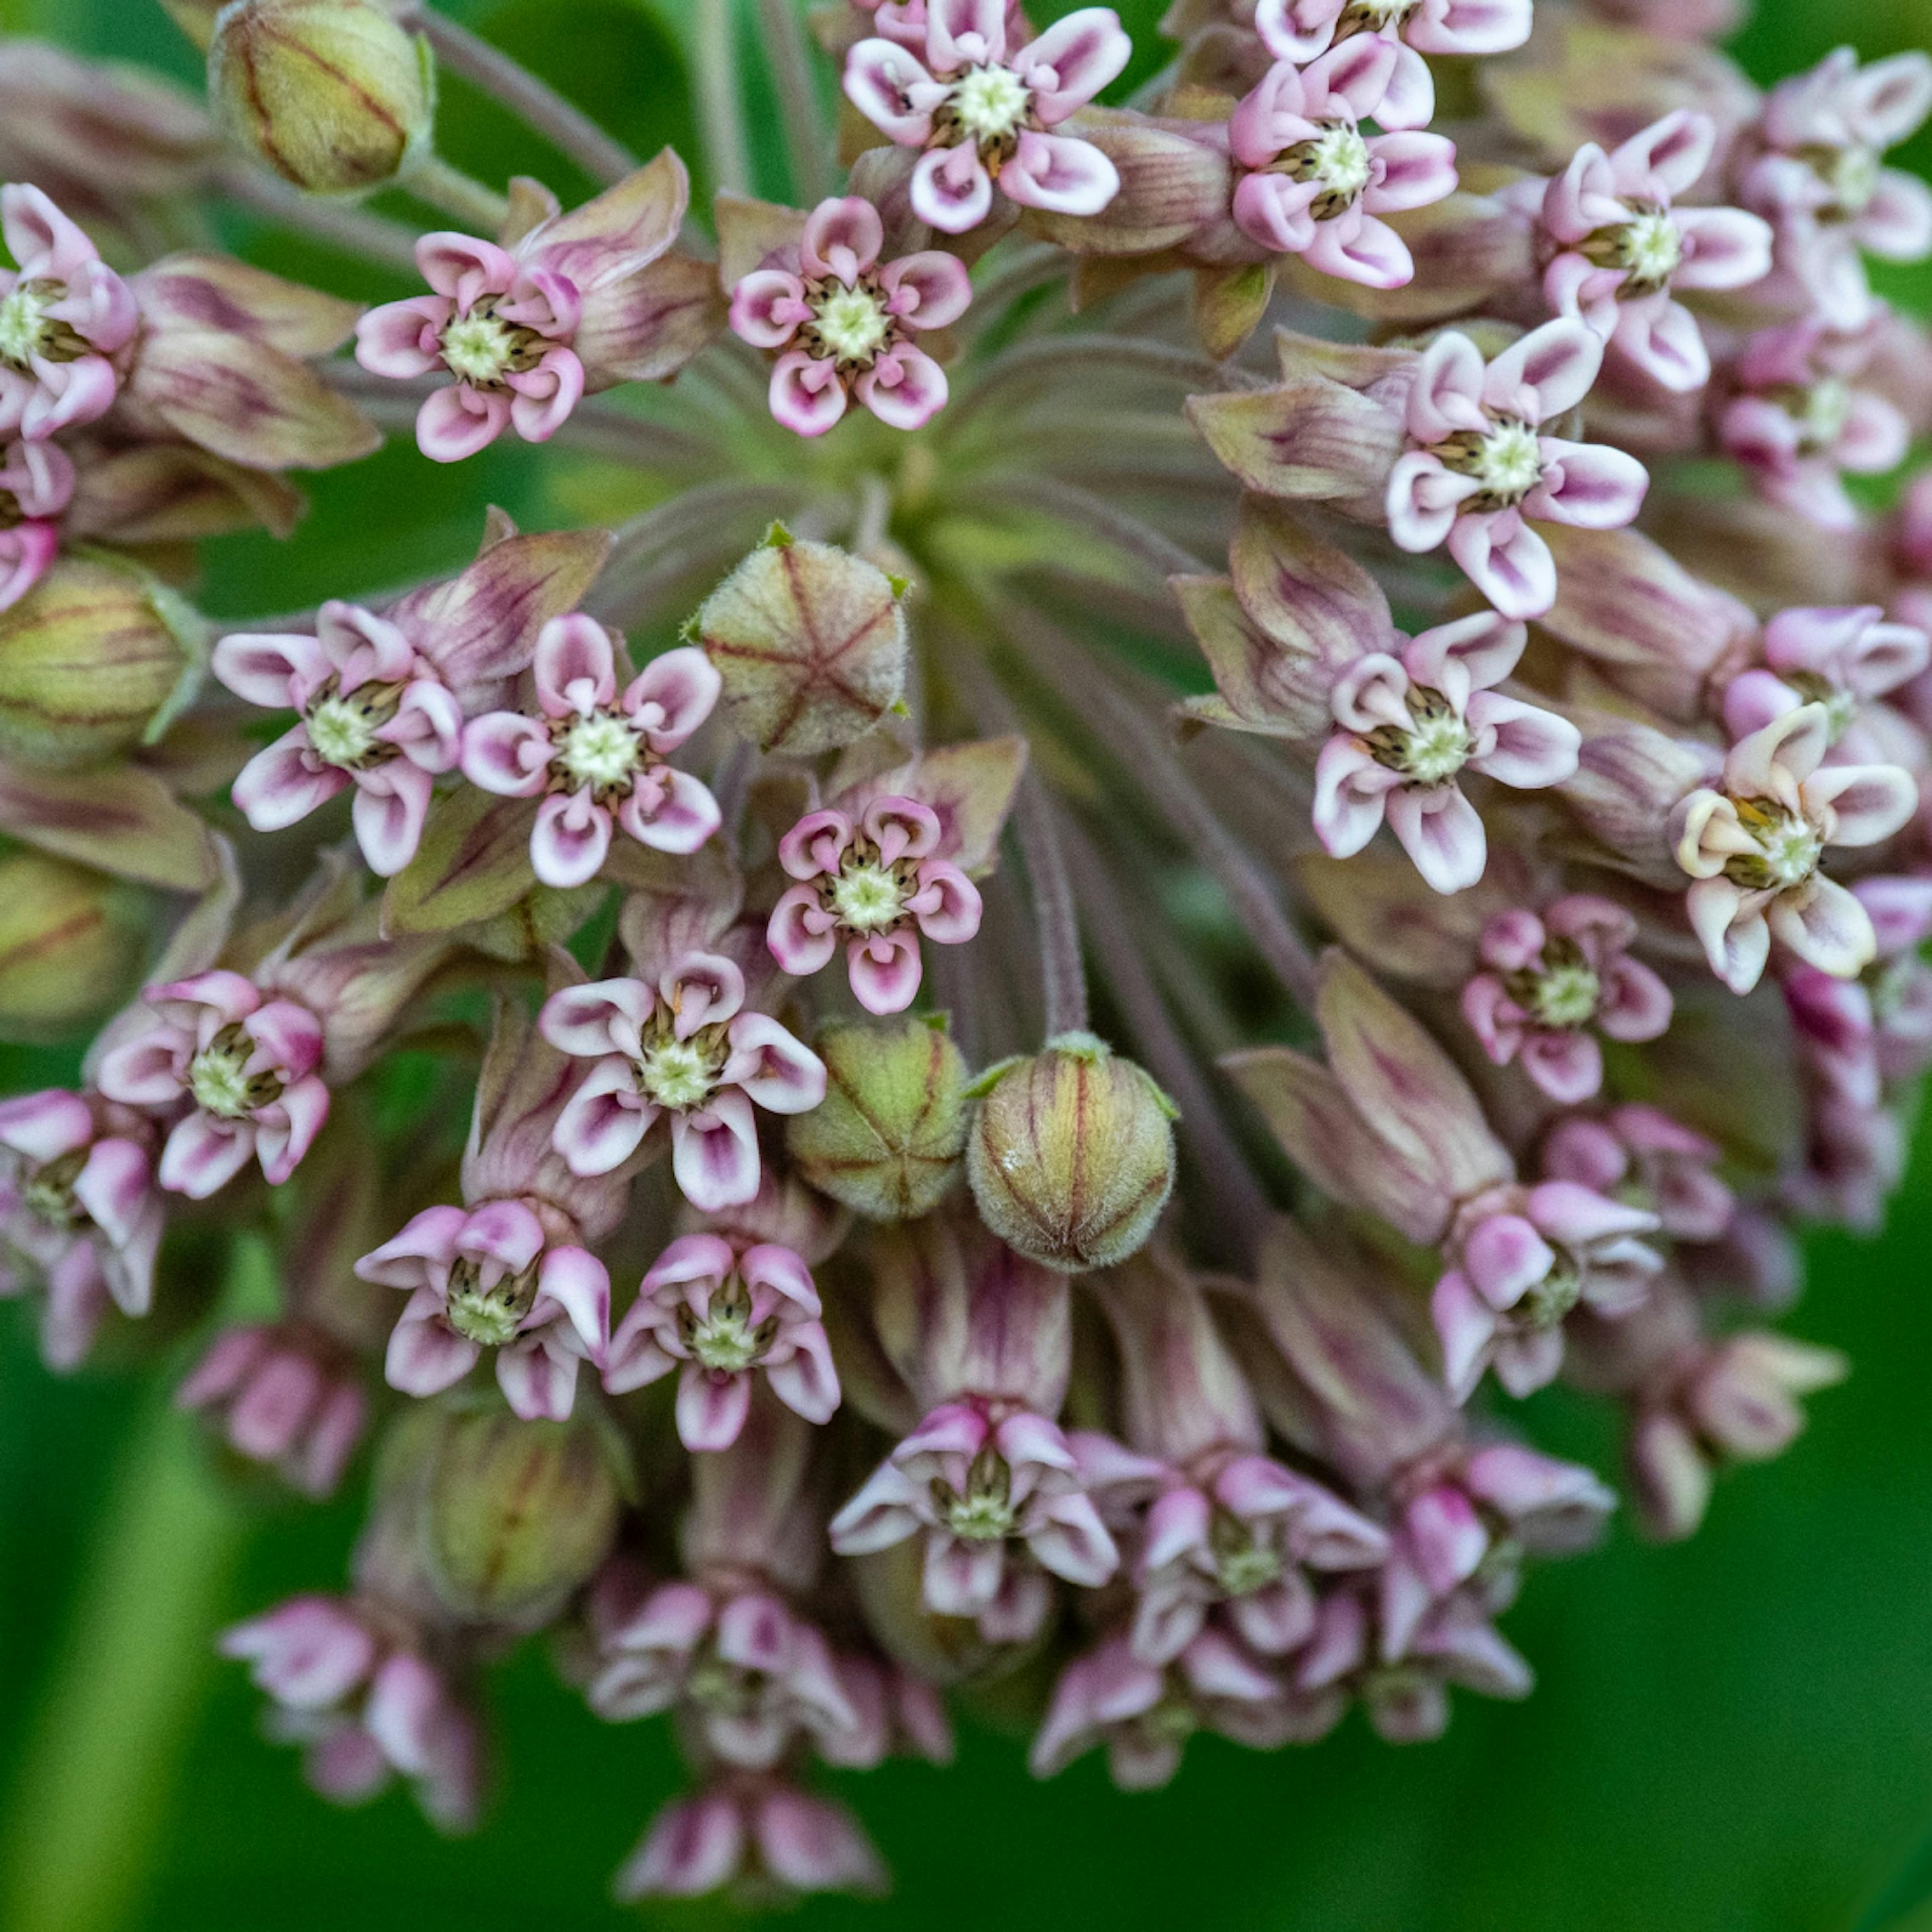 Milkweed is necessary for Monarchs' survival, but the plant is disappearing.